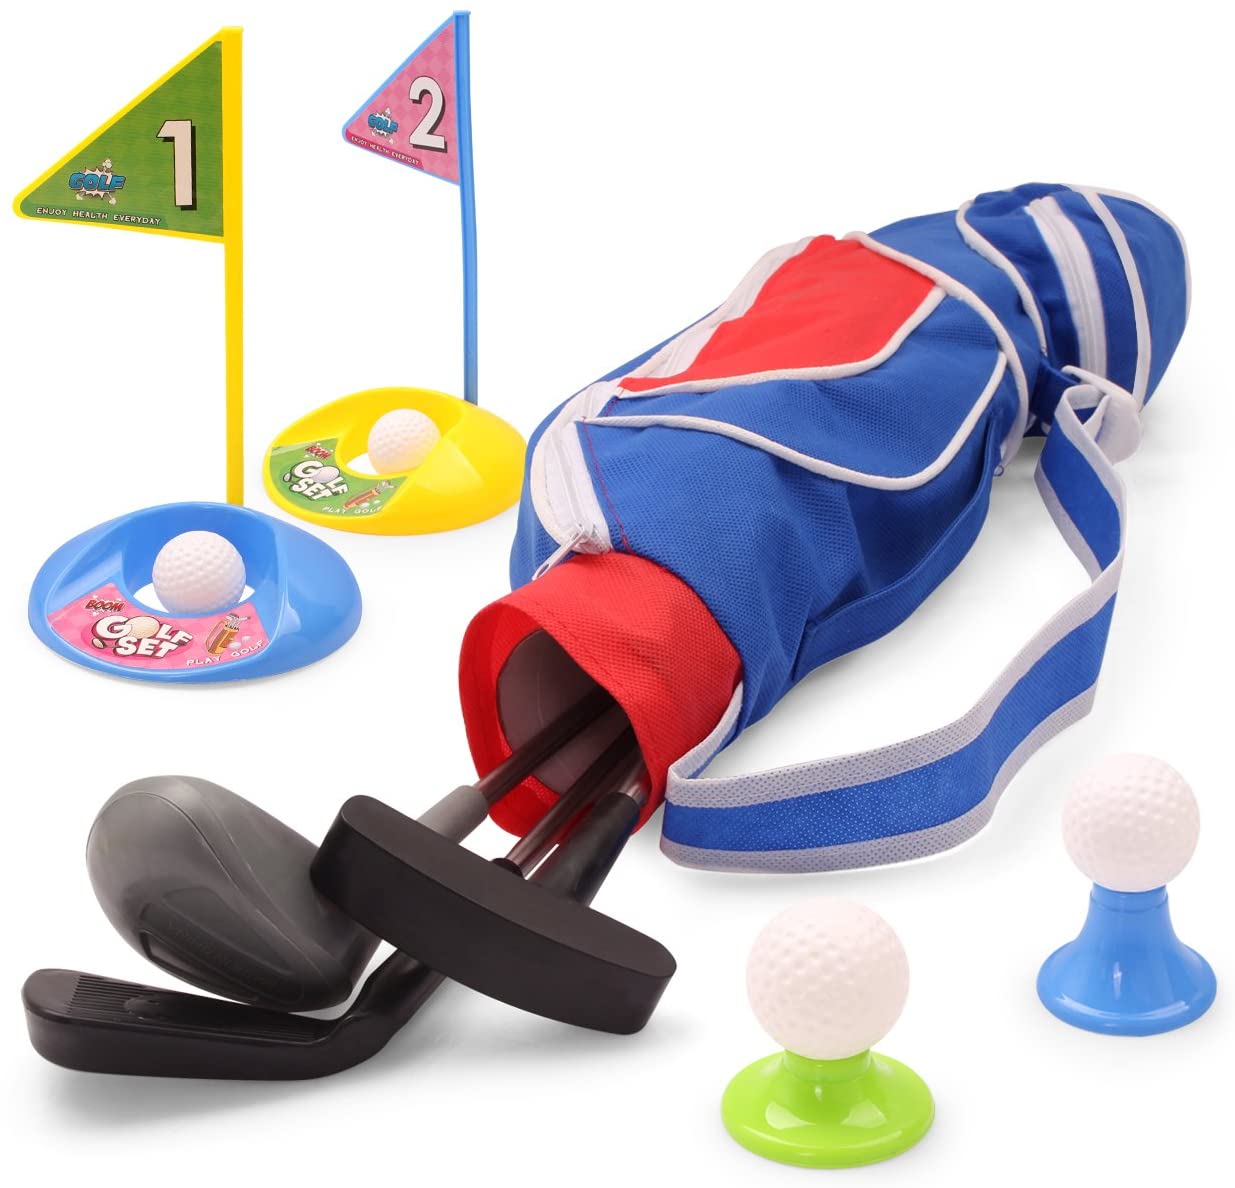 EXERCISE N PLAY Deluxe Happy Kids/Toddler Golf Clubs Set Grow-to-Pro Golfer 15 Piece Set (Blue)